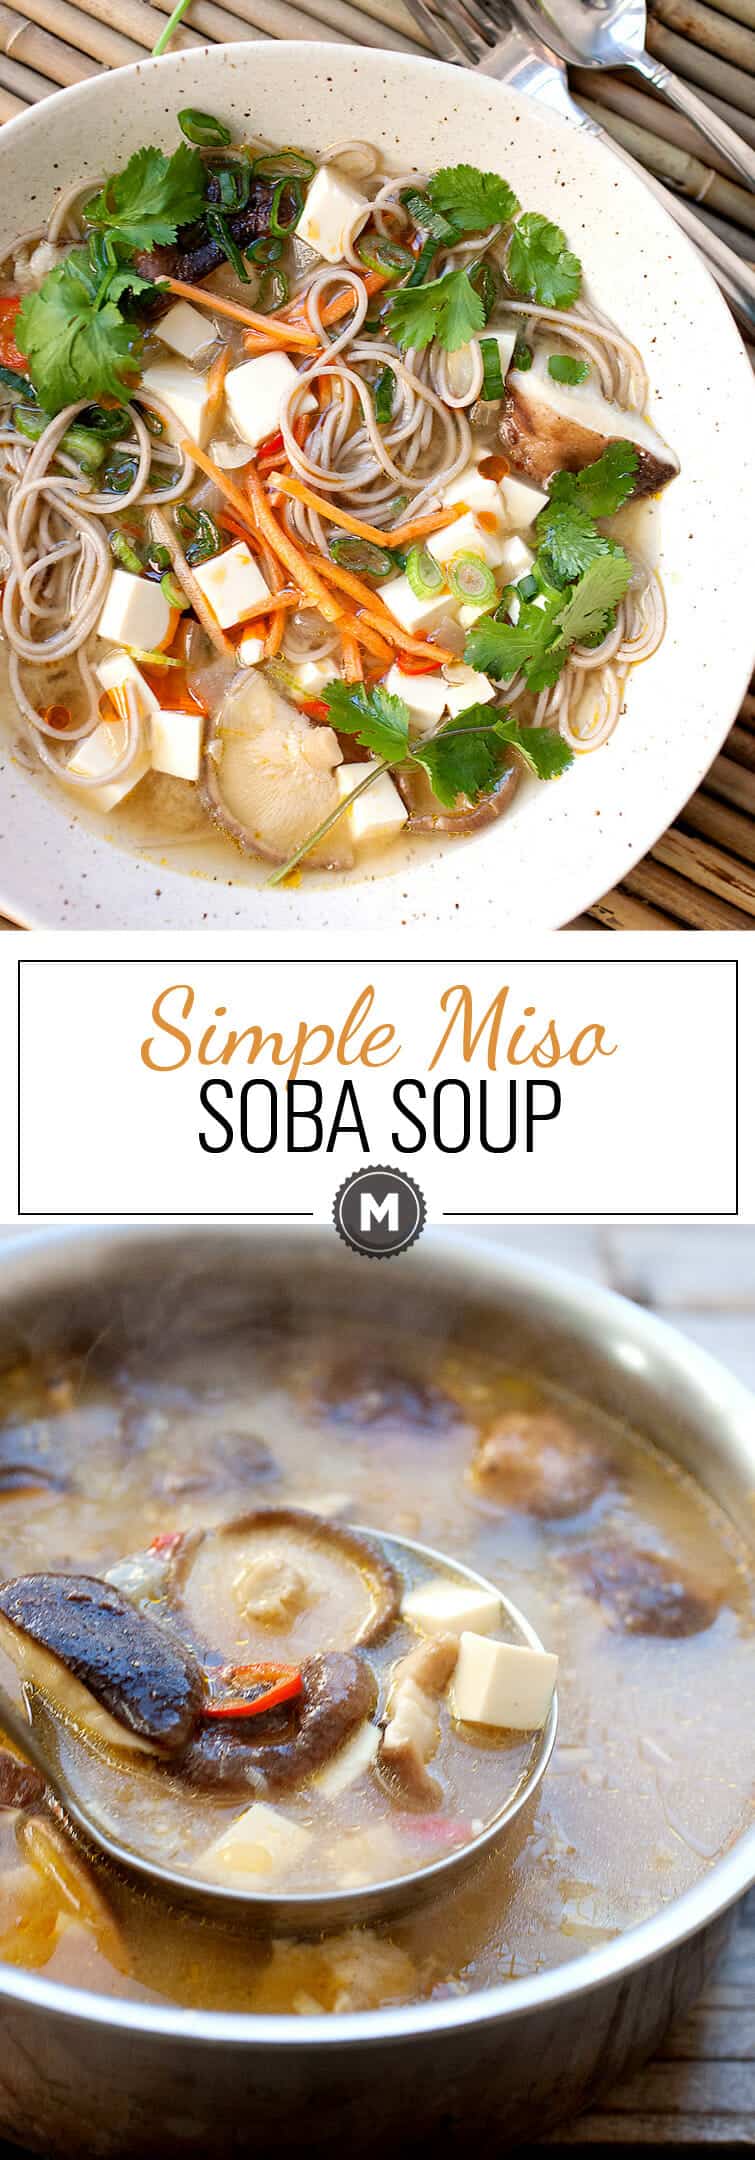 Simple Miso Soba Soup: This is the soup you need to cure the winter sniffles! Loaded with savory umami miso broth, mushrooms, soba, and light tofu, the soup is warming and has just enough spice to wake up the tastebuds. Plus, it only takes about 30-40 minutes to get it on the table! | macheesmo.com